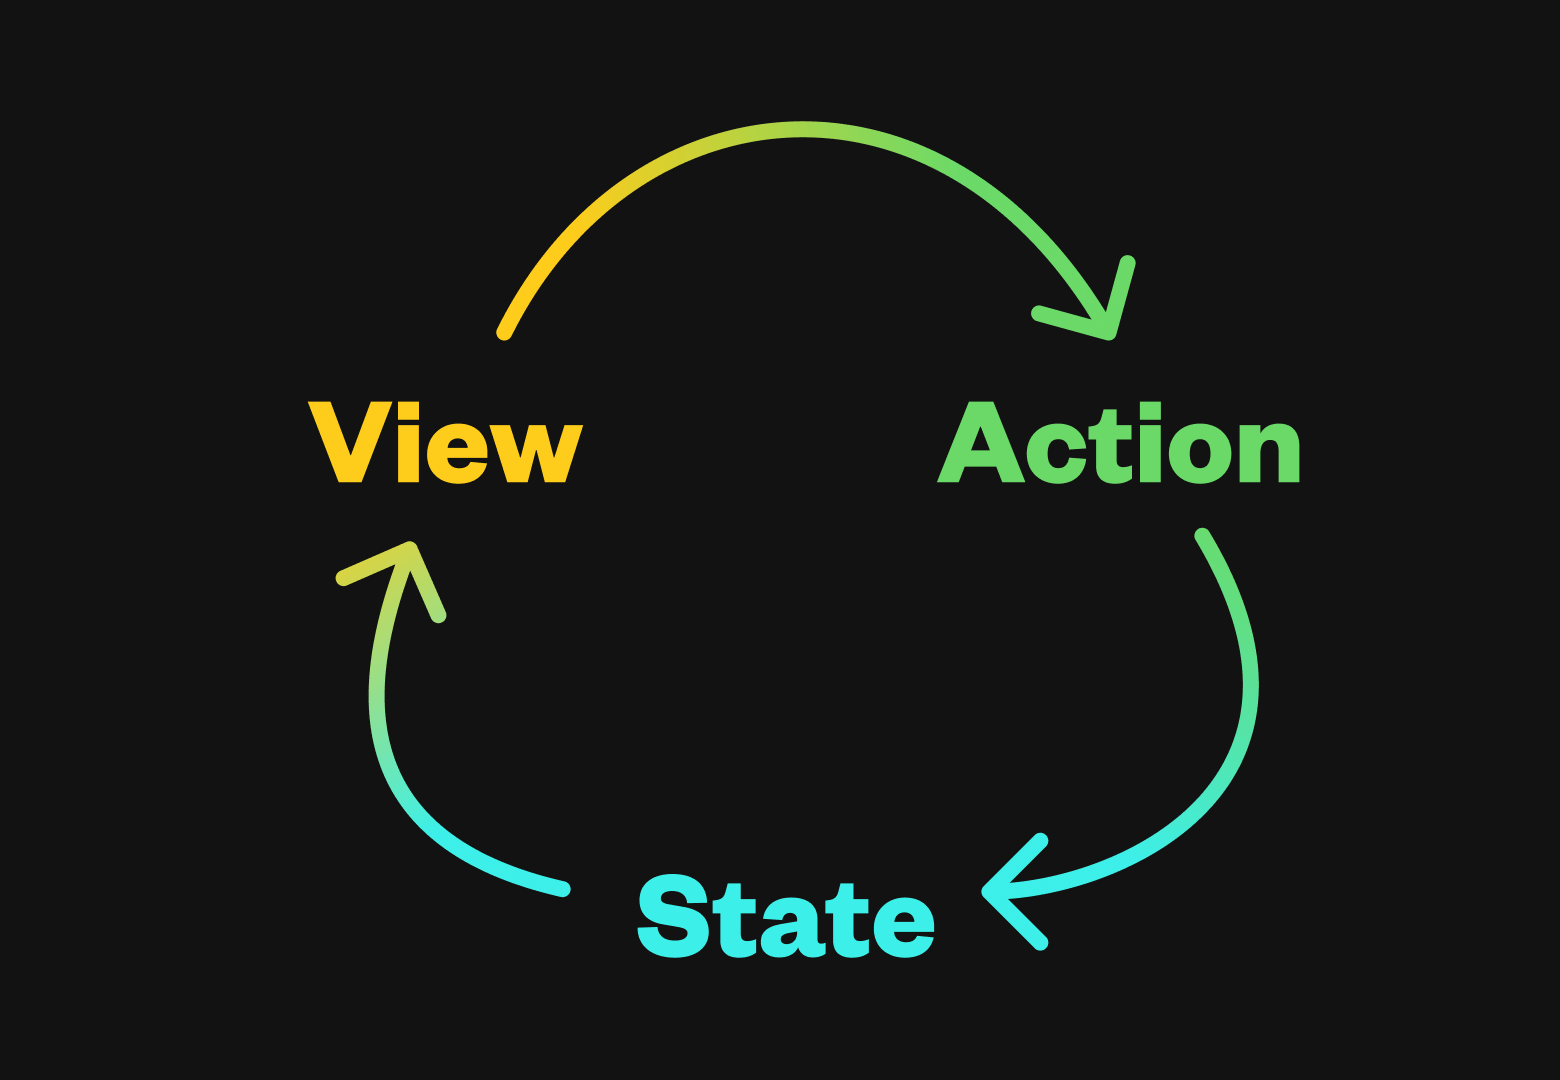 Illustration of the idea of one-way data flow depicting lines drawing a circular flow from view to action to state.